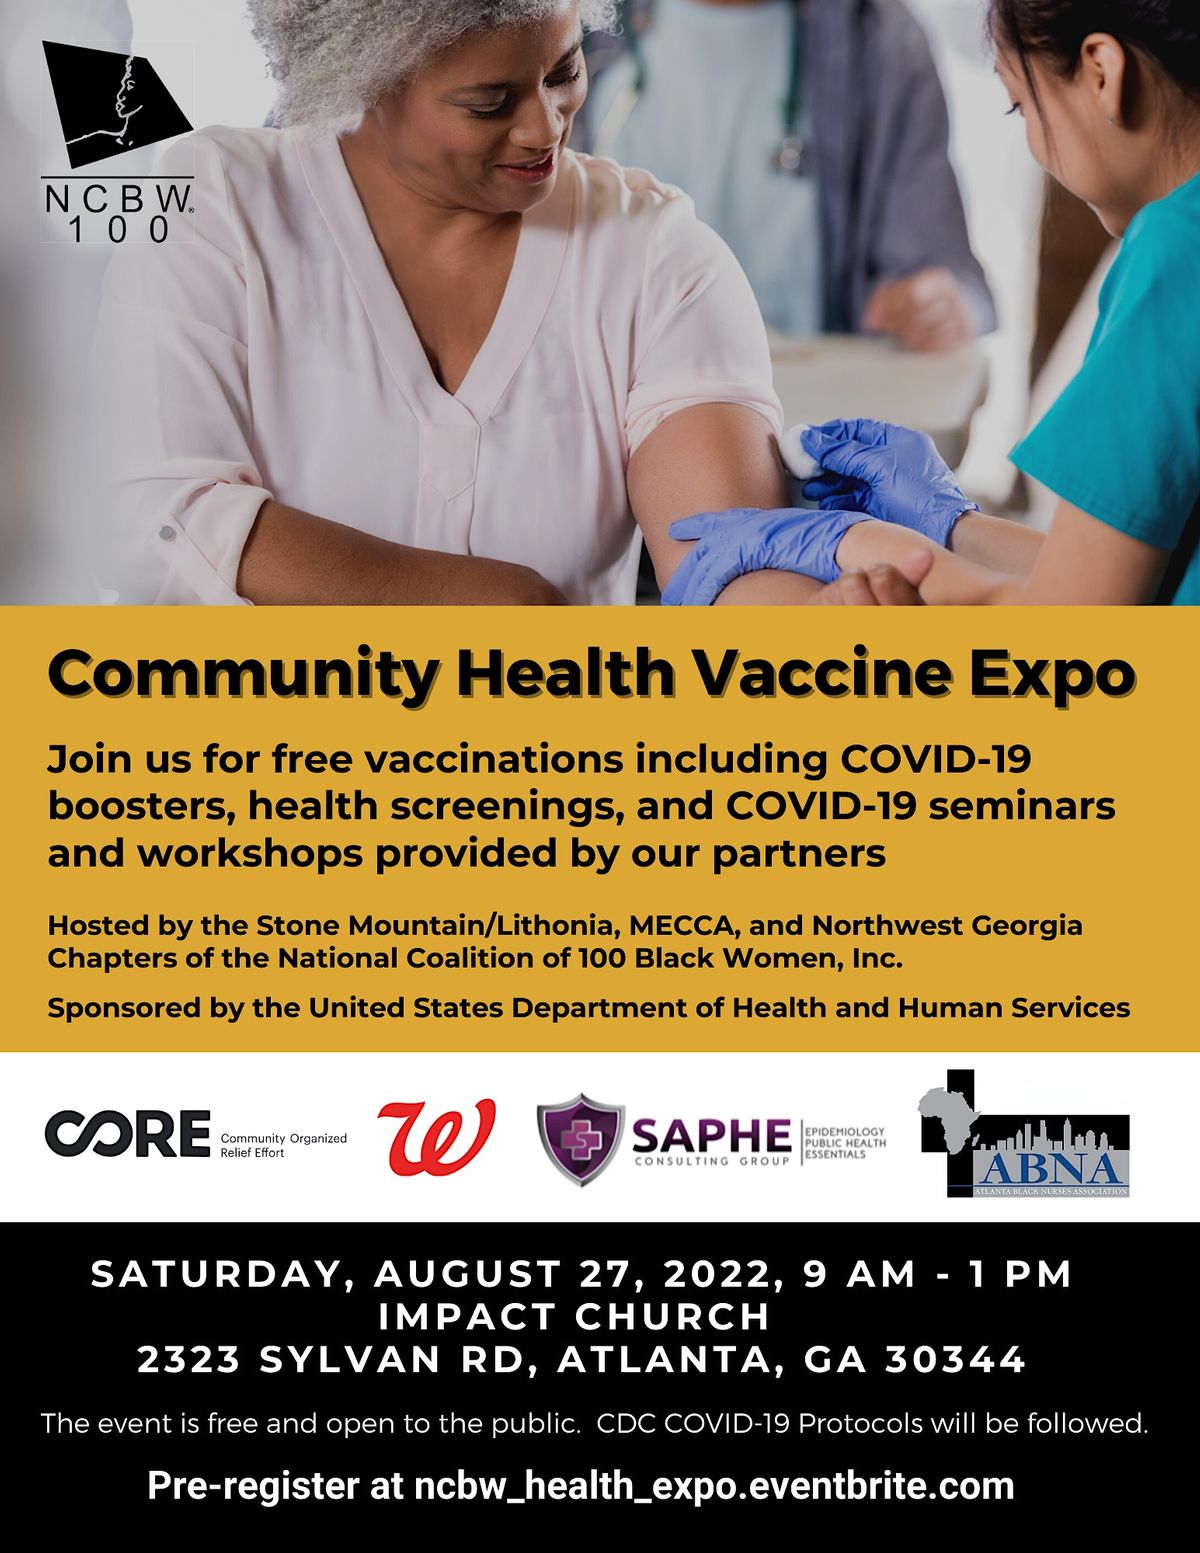 Community Health Expo and Vaccine Drive